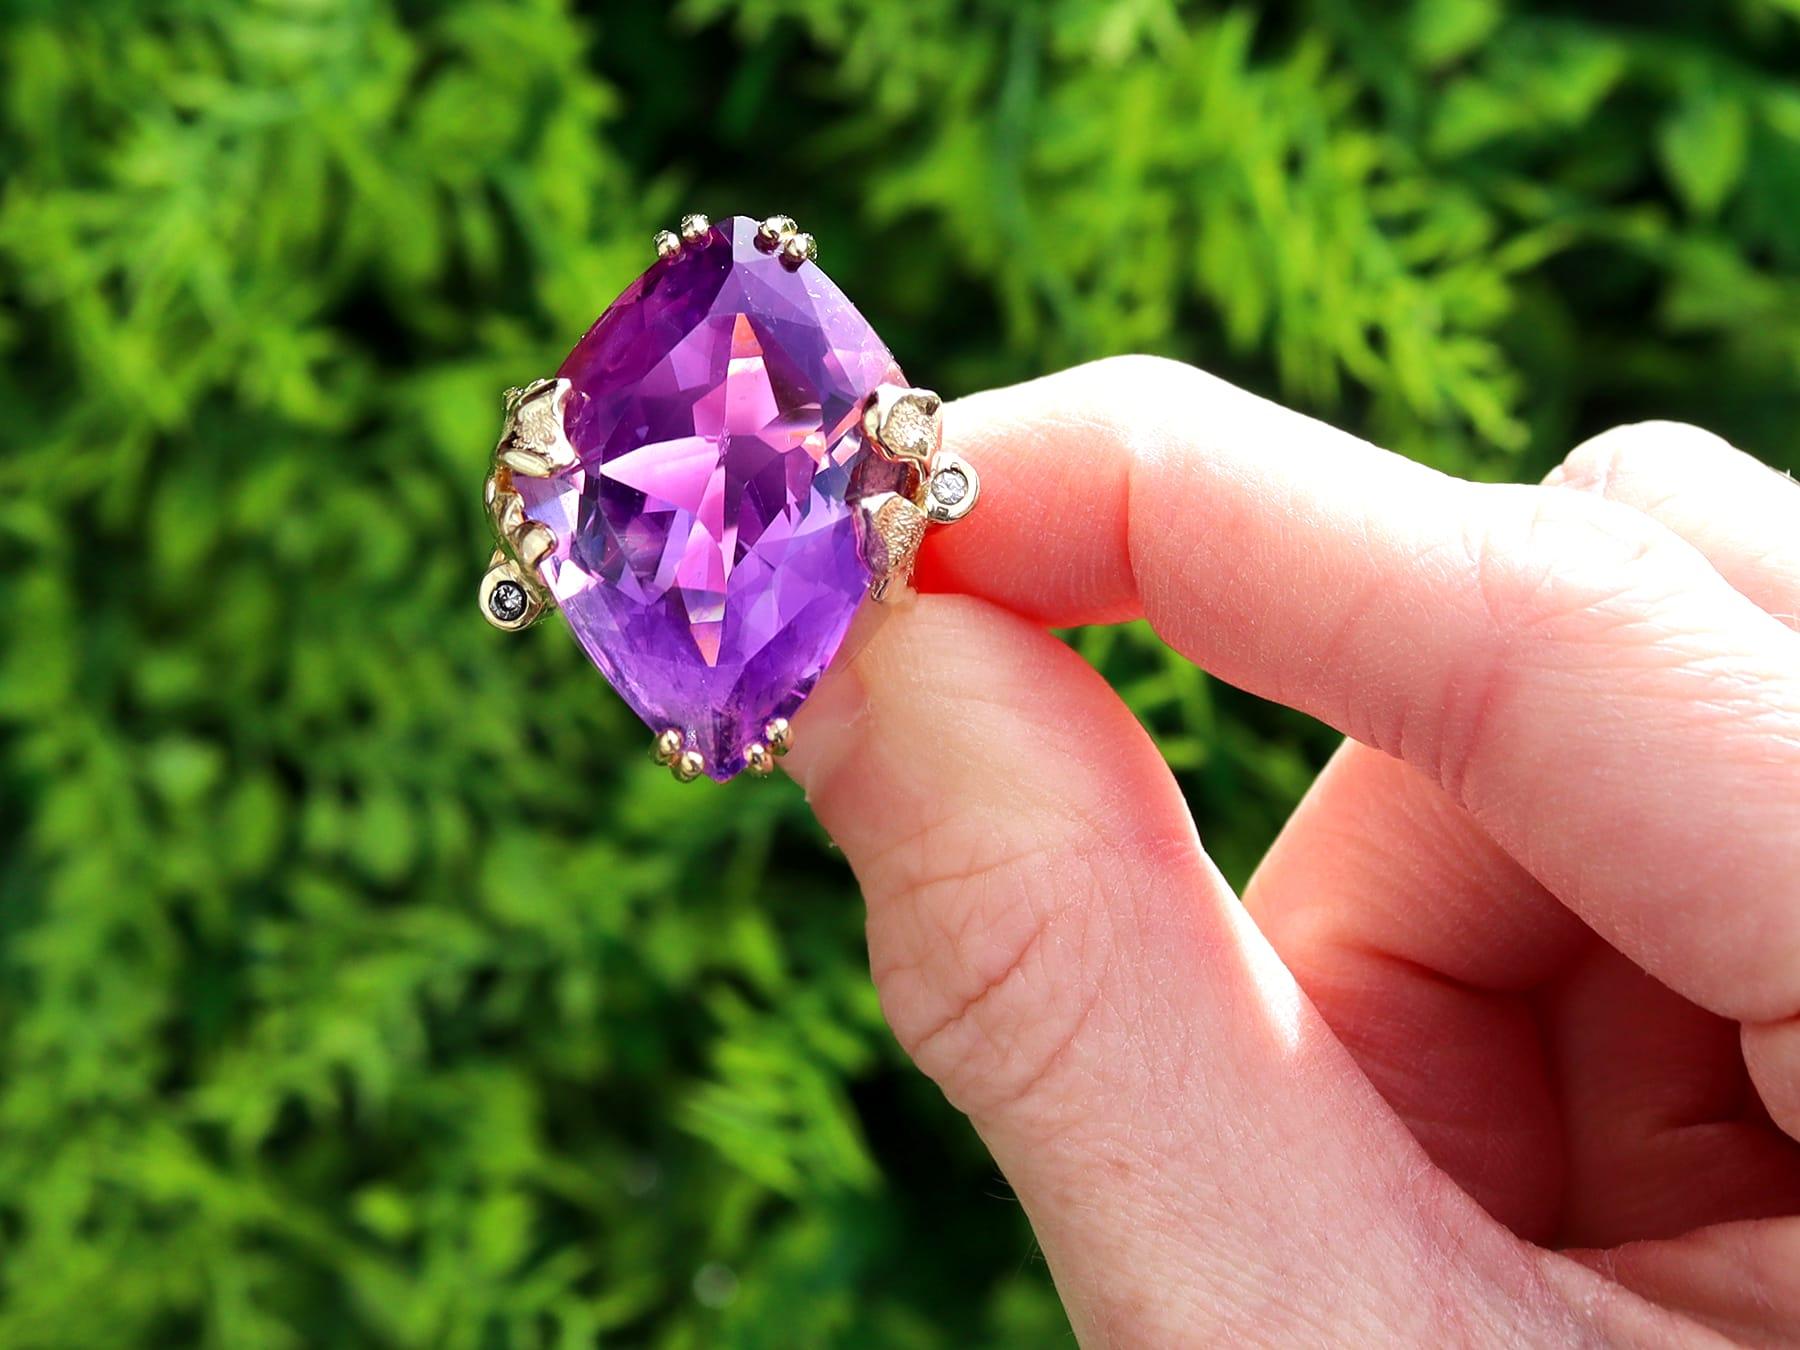 A stunning vintage large 28.83 carat amethyst and 0.06 carat diamond, 14 karat yellow gold dress ring; part of our diverse vintage amethyst jewellery collection.

This stunning, fine and impressive vintage amethyst ring has been crafted in 14k